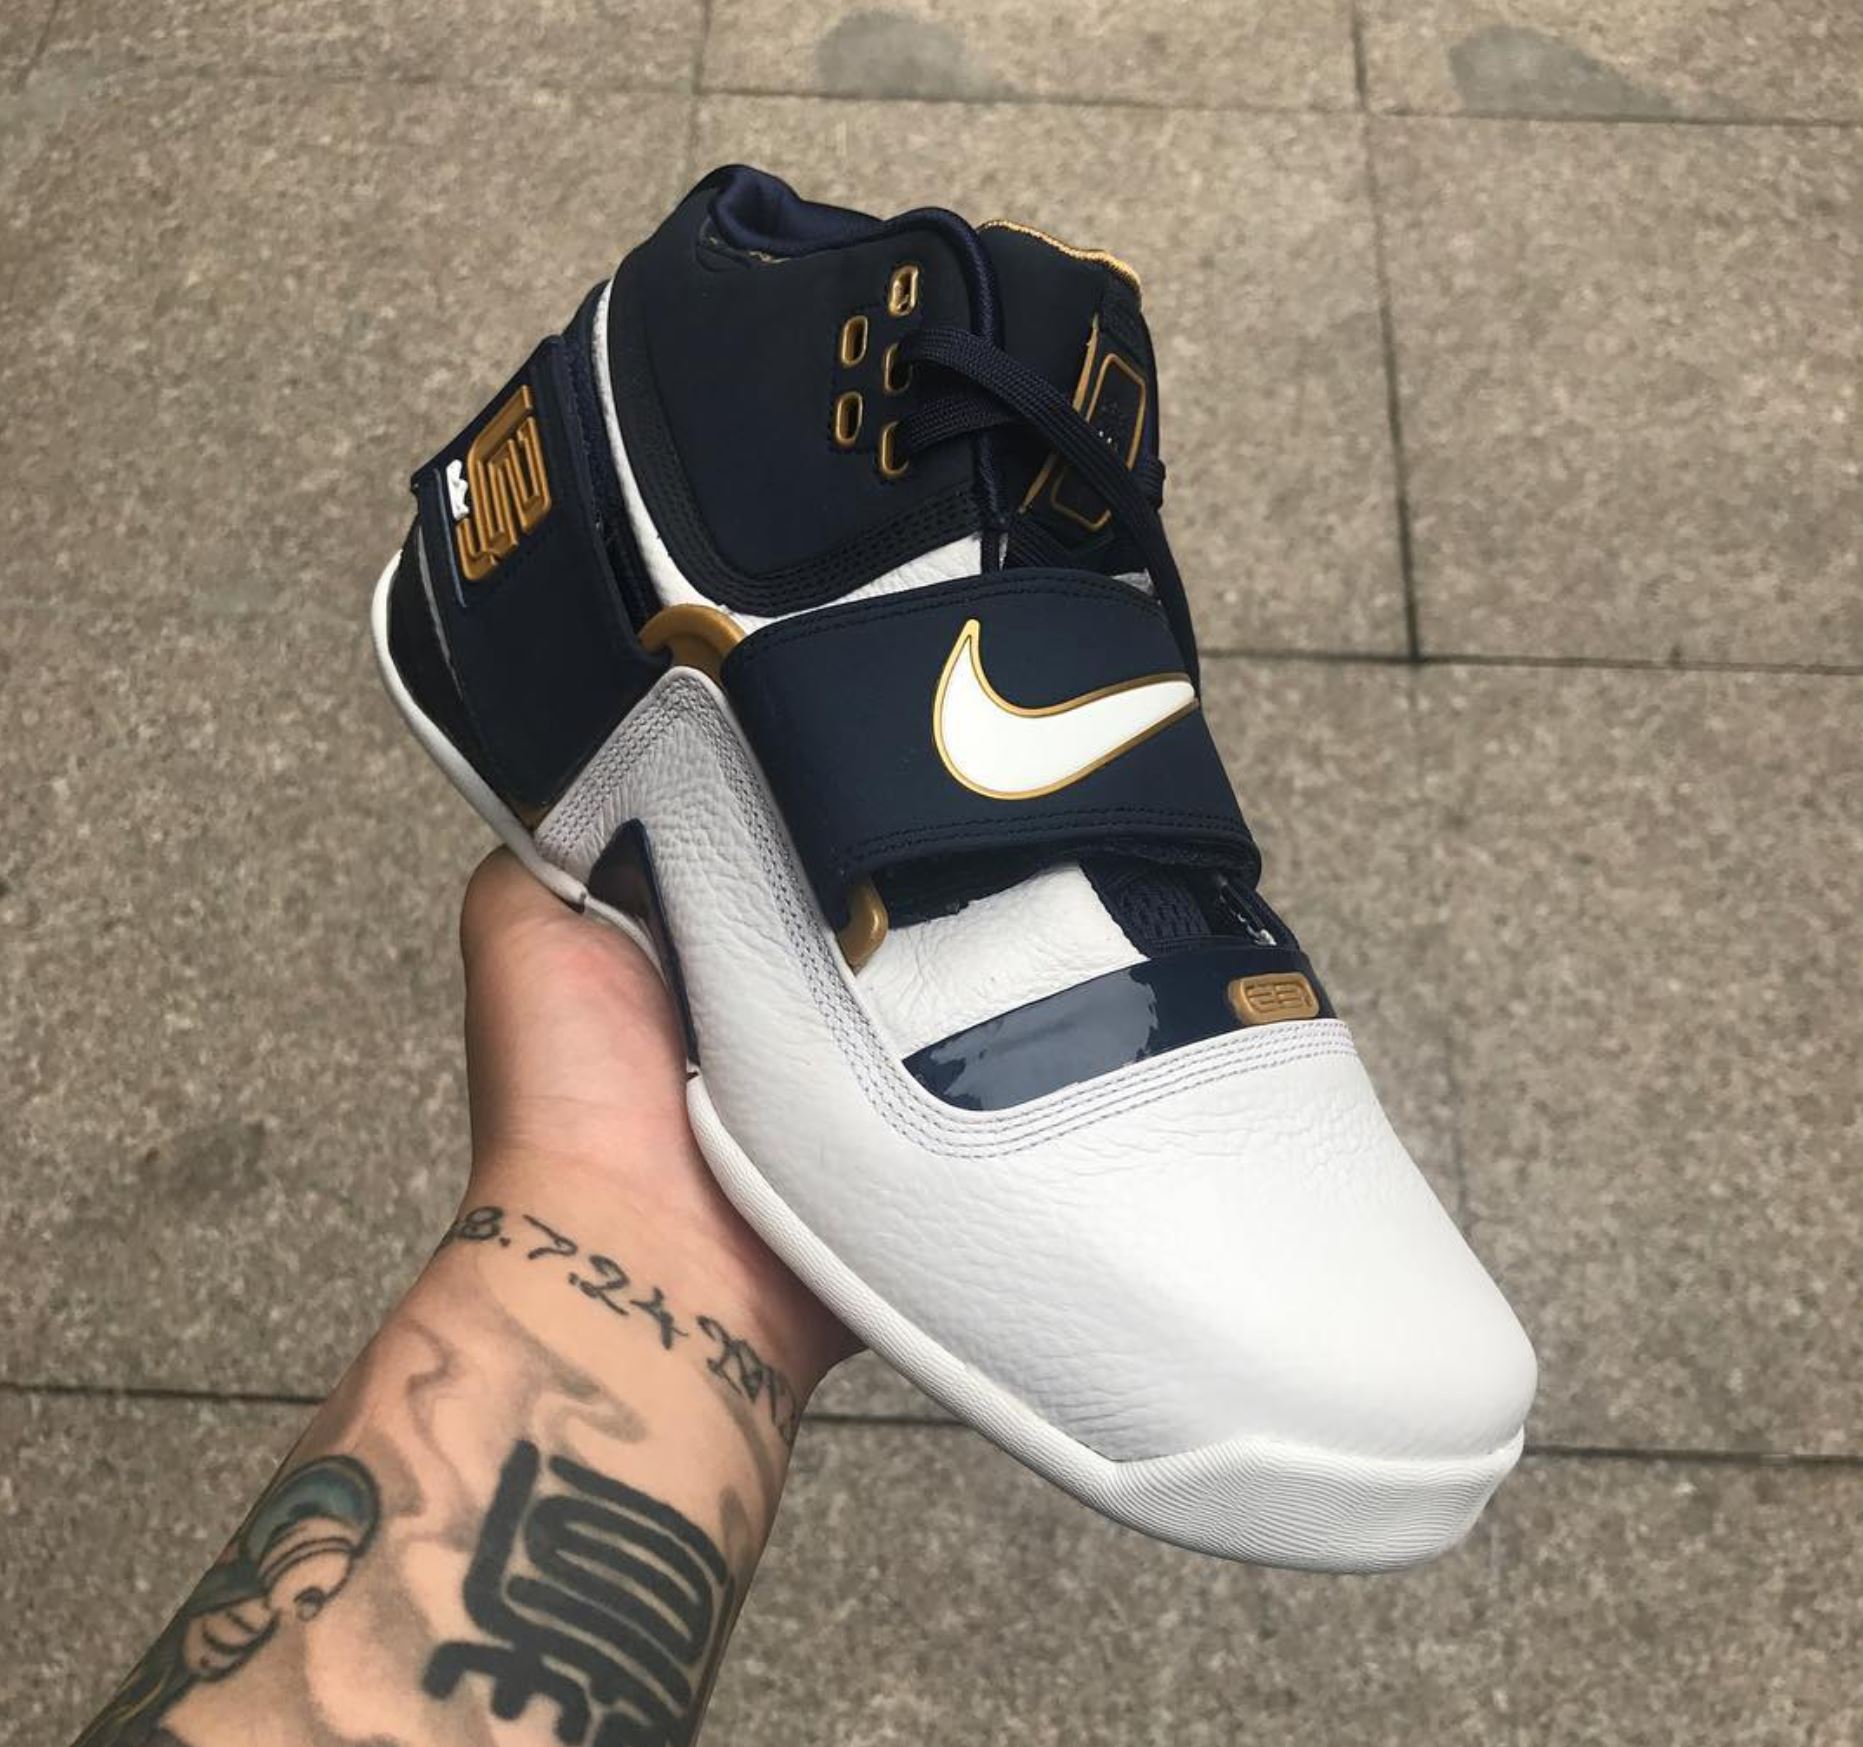 The Nike LeBron Soldier 1 Will Be 